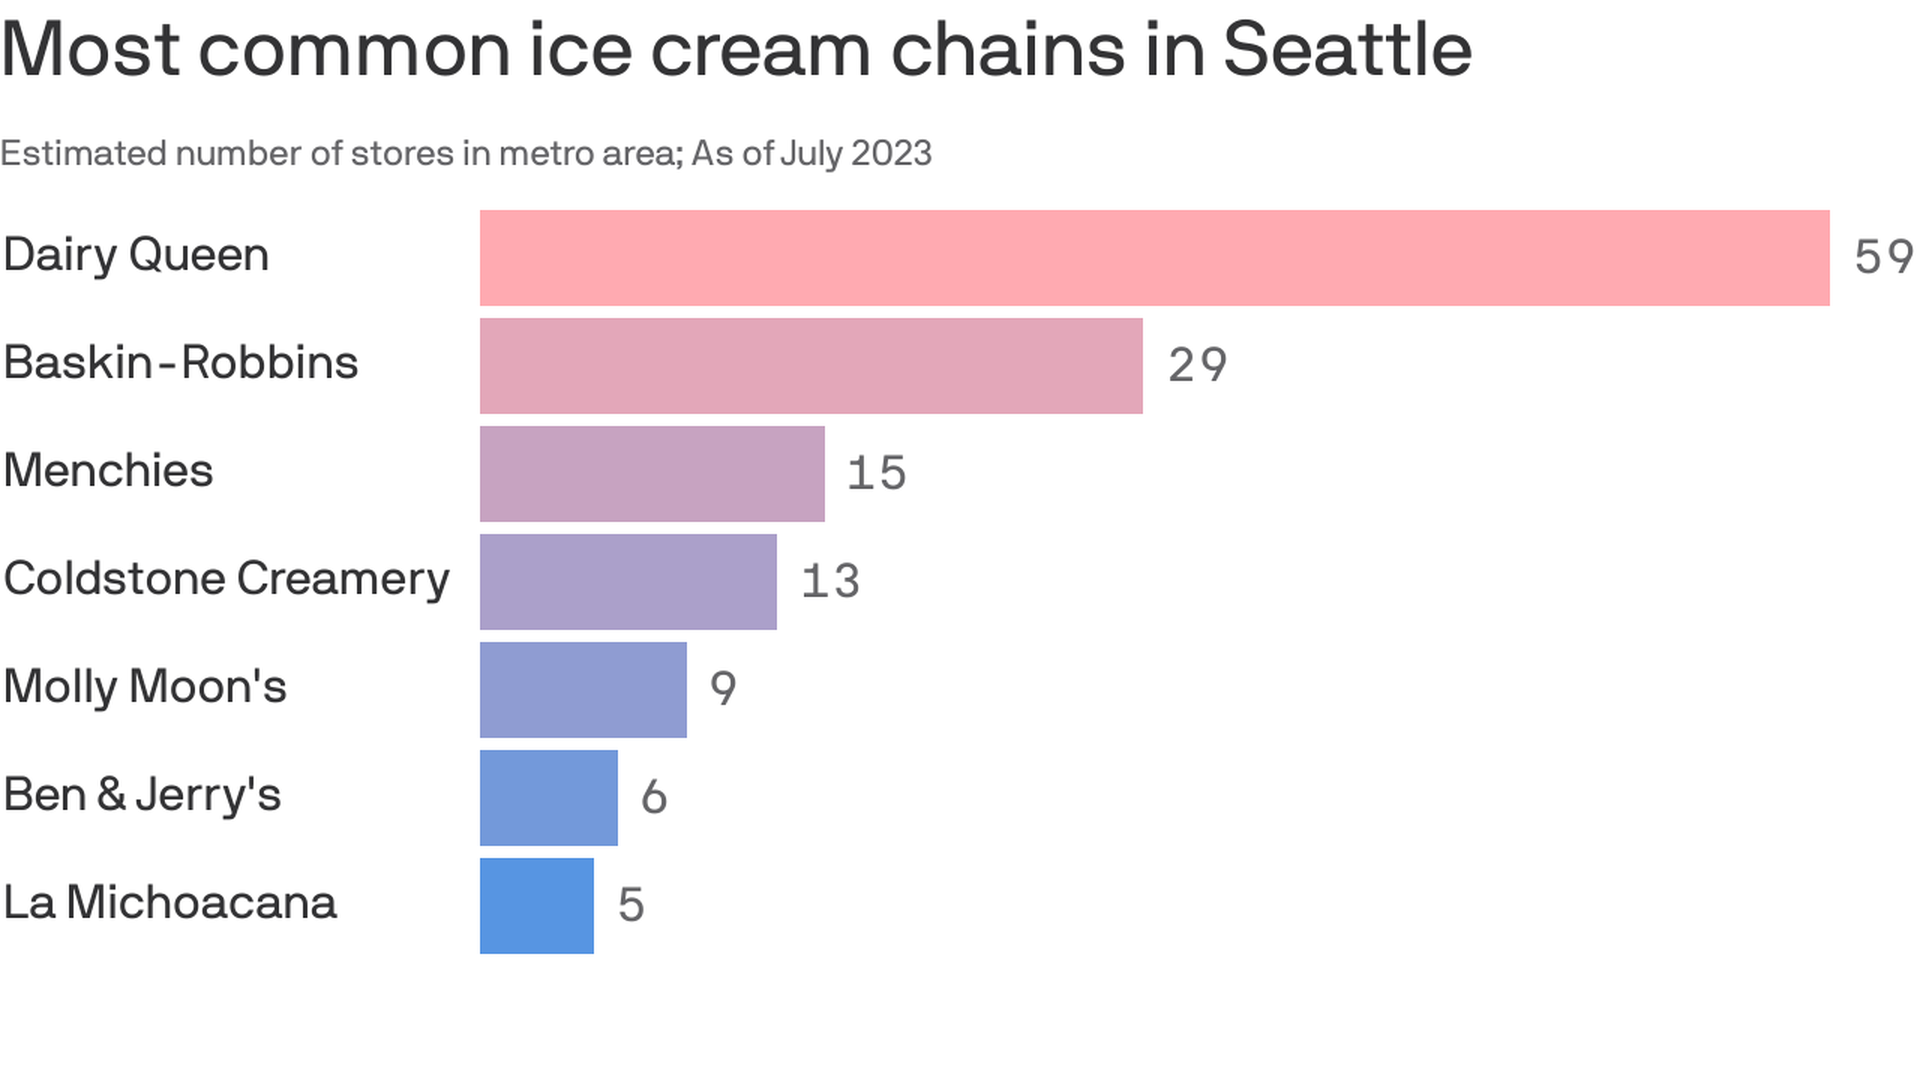 A bar chart showing that Dairy Queen has 59 locations in the Seattle metro area, Baskin-Robbins has 29, Menchies has 15, Coldstone Creamery has 13, Molly Moon's has 9, Ben &Jerry's has 6, and La Michoacana has 5. 